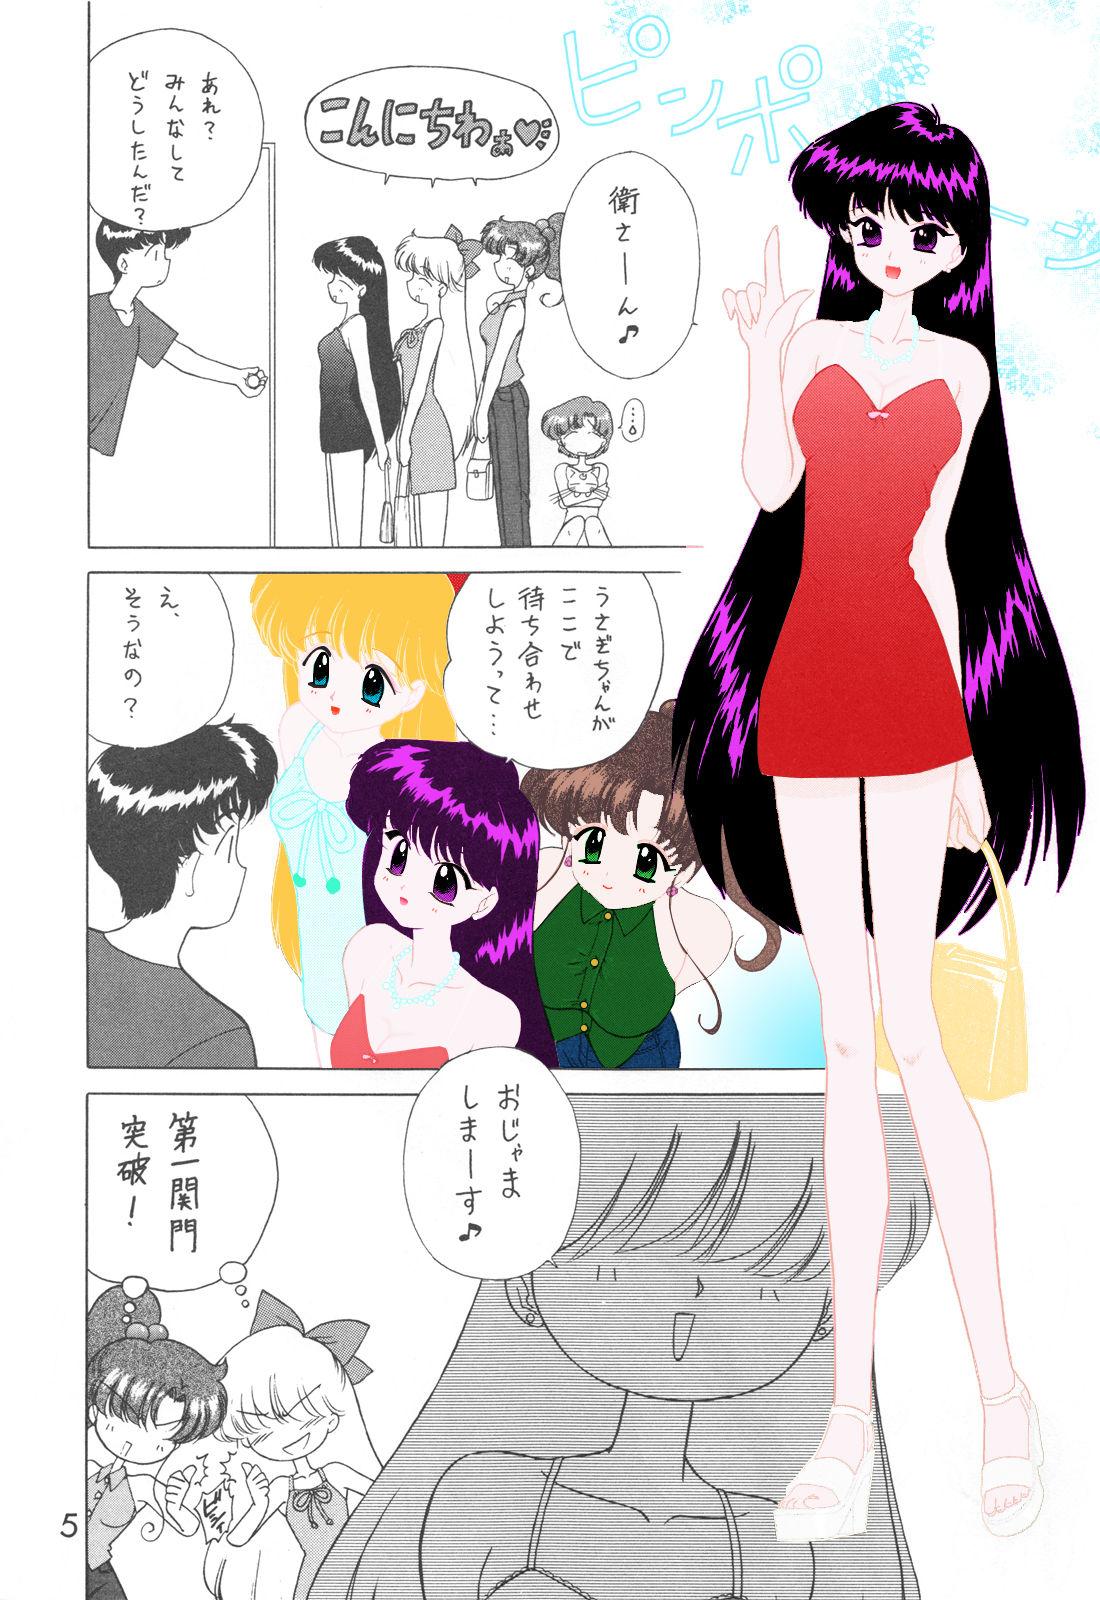 Cute How to colorize and examples - Sailor moon | bishoujo senshi sailor moon Moaning - Page 2